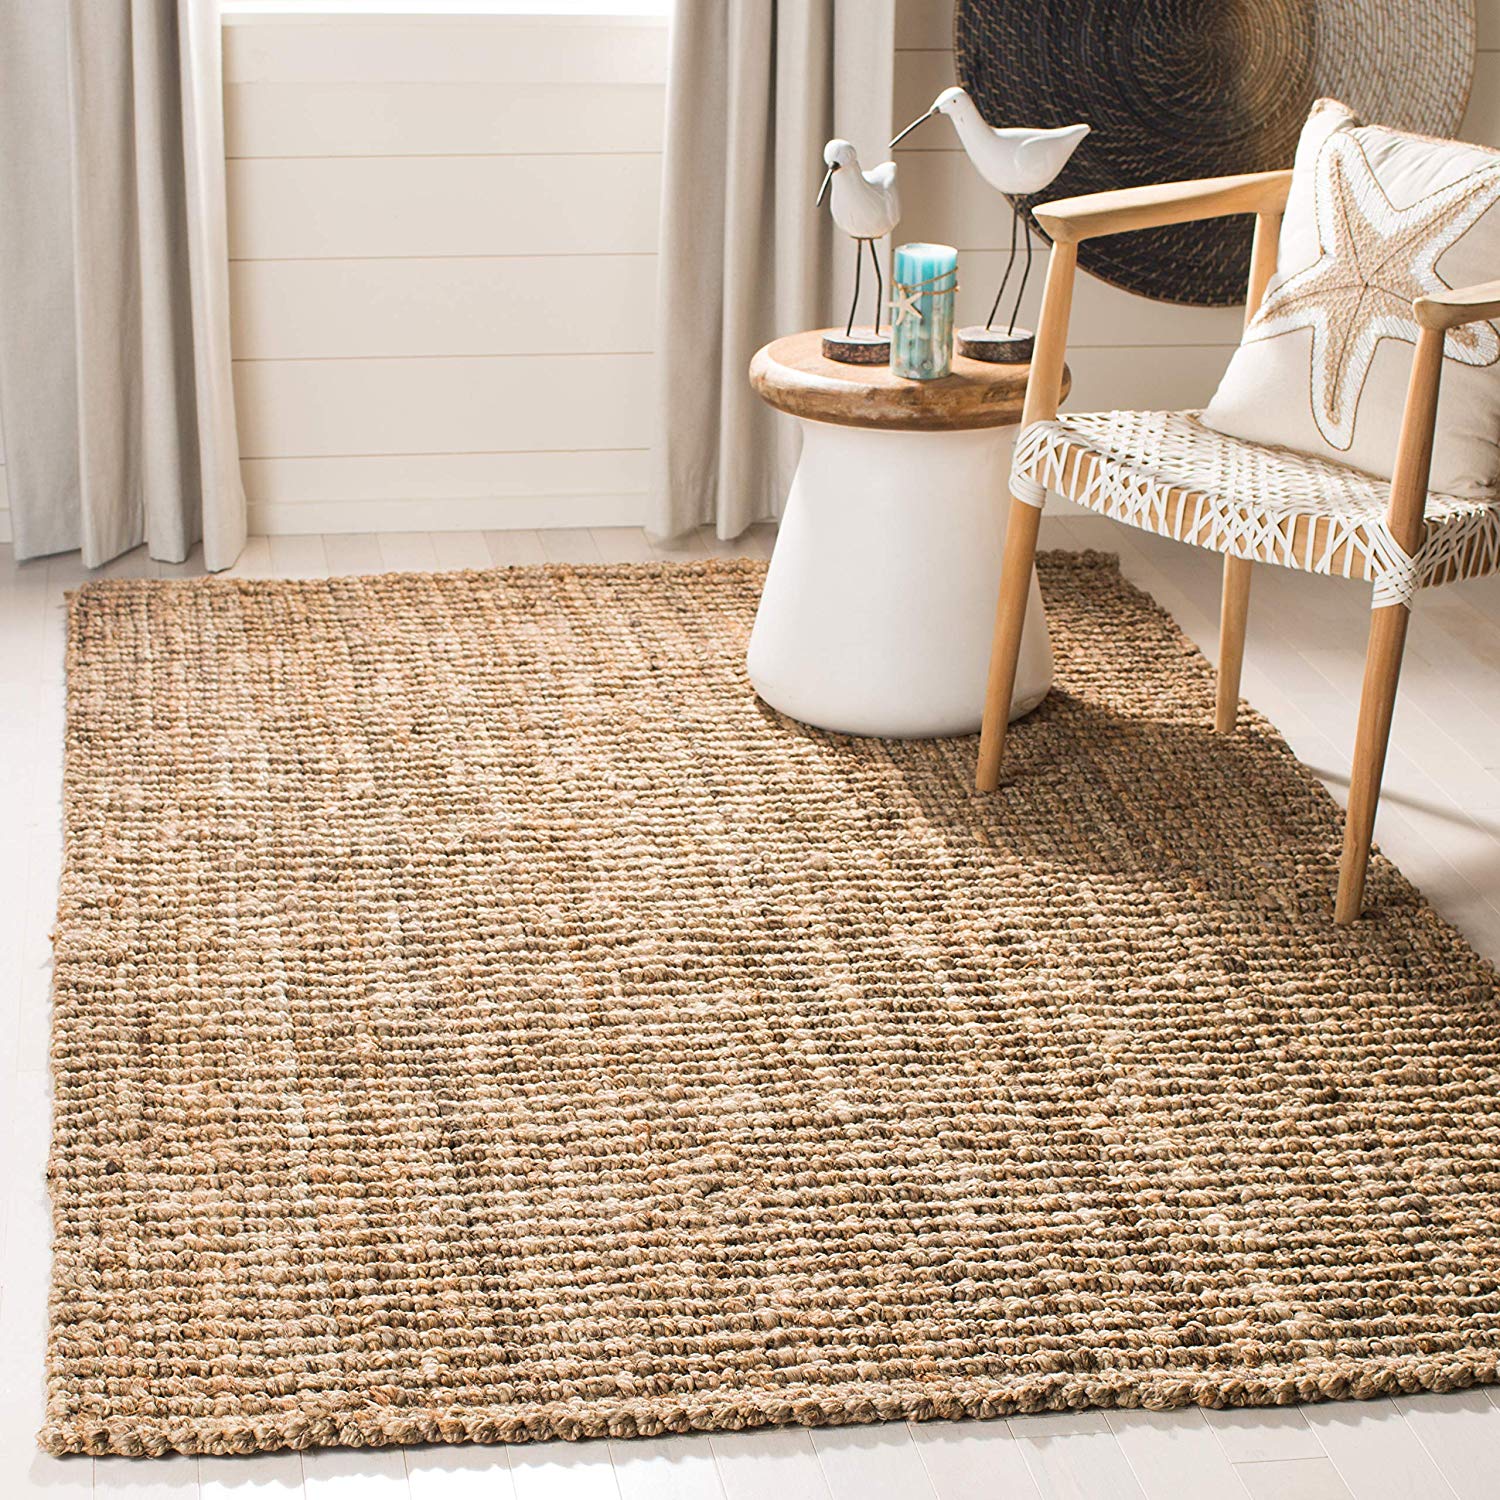 natural fiber rugs are better